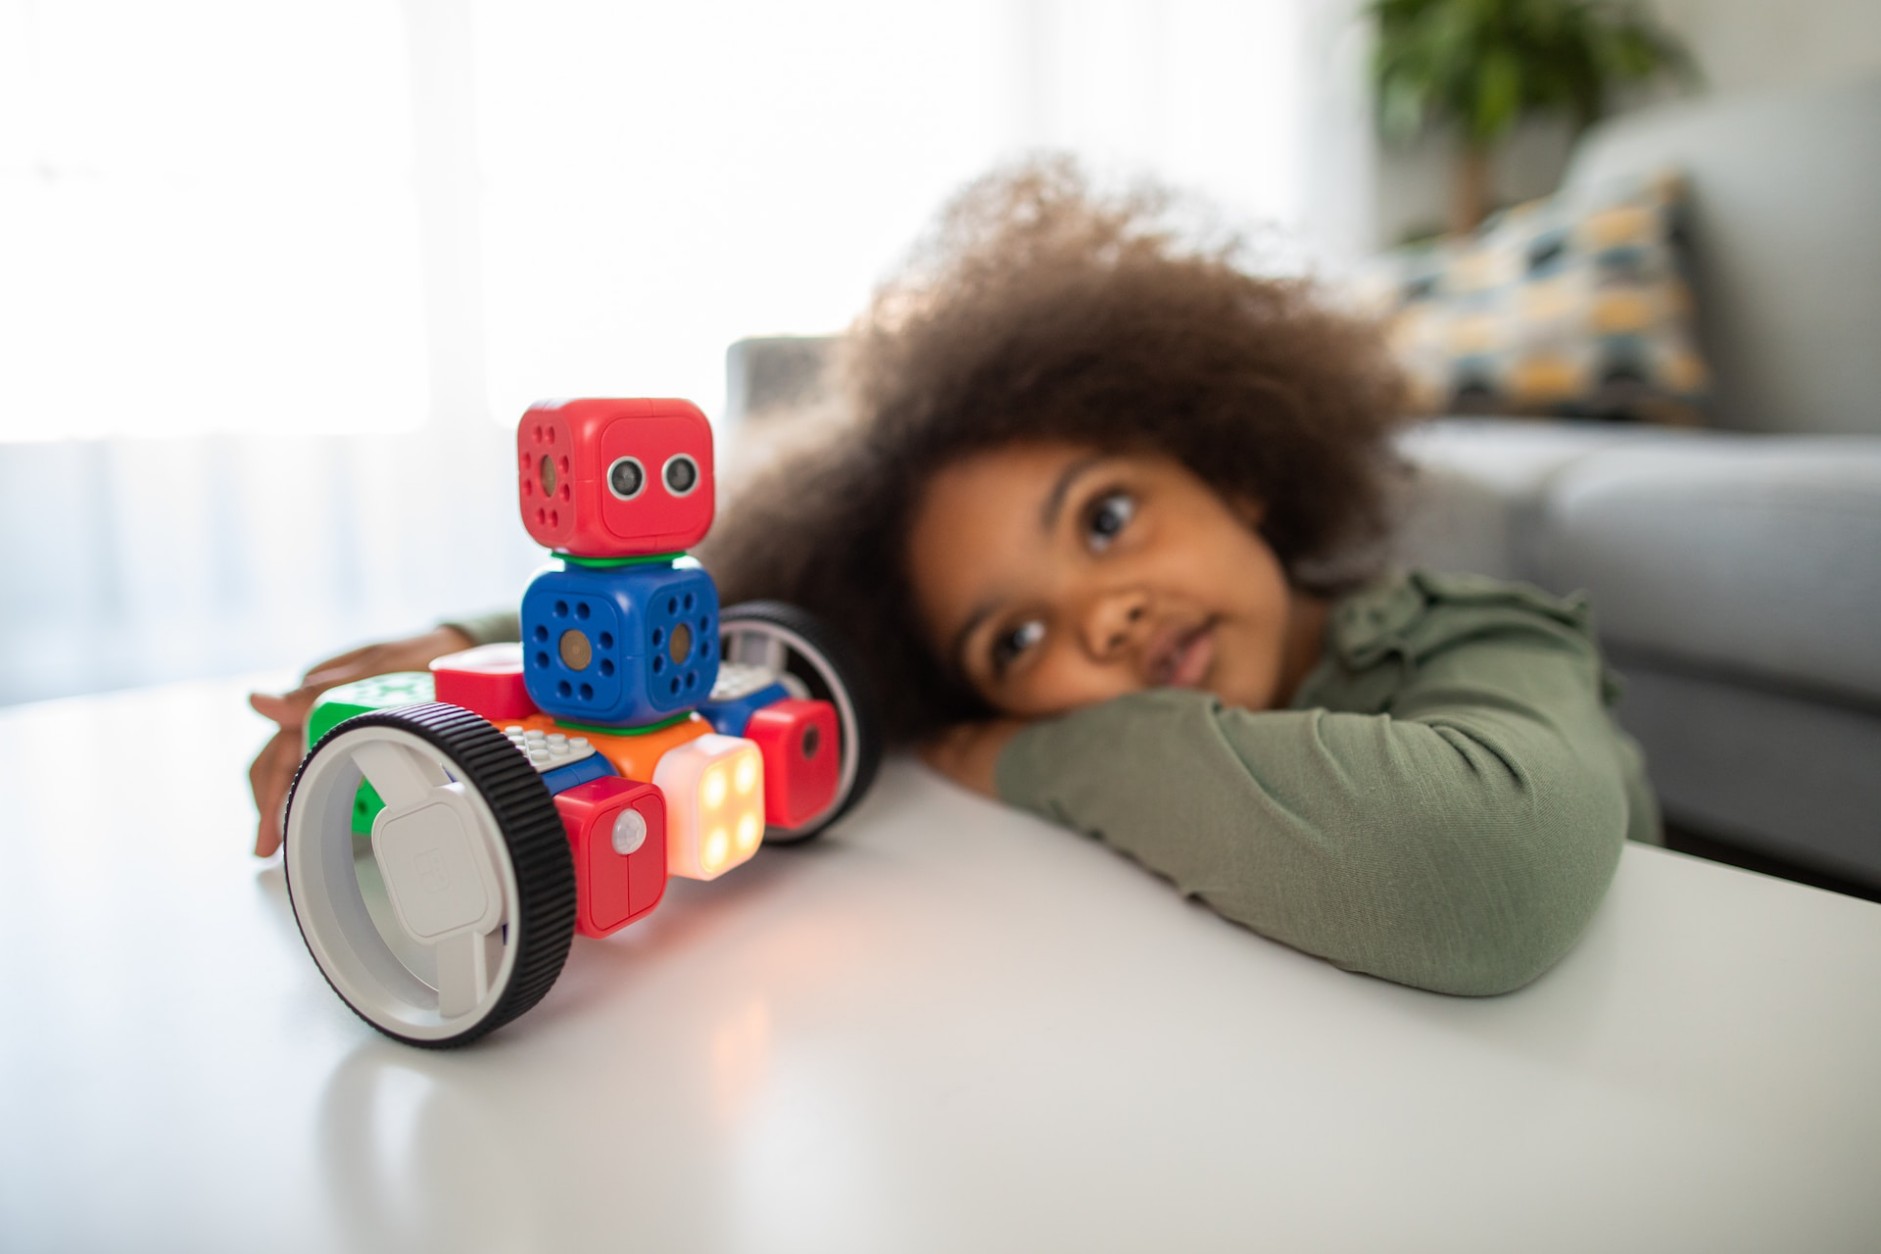 Classroom robot helps keep kids with learning disabilities on track